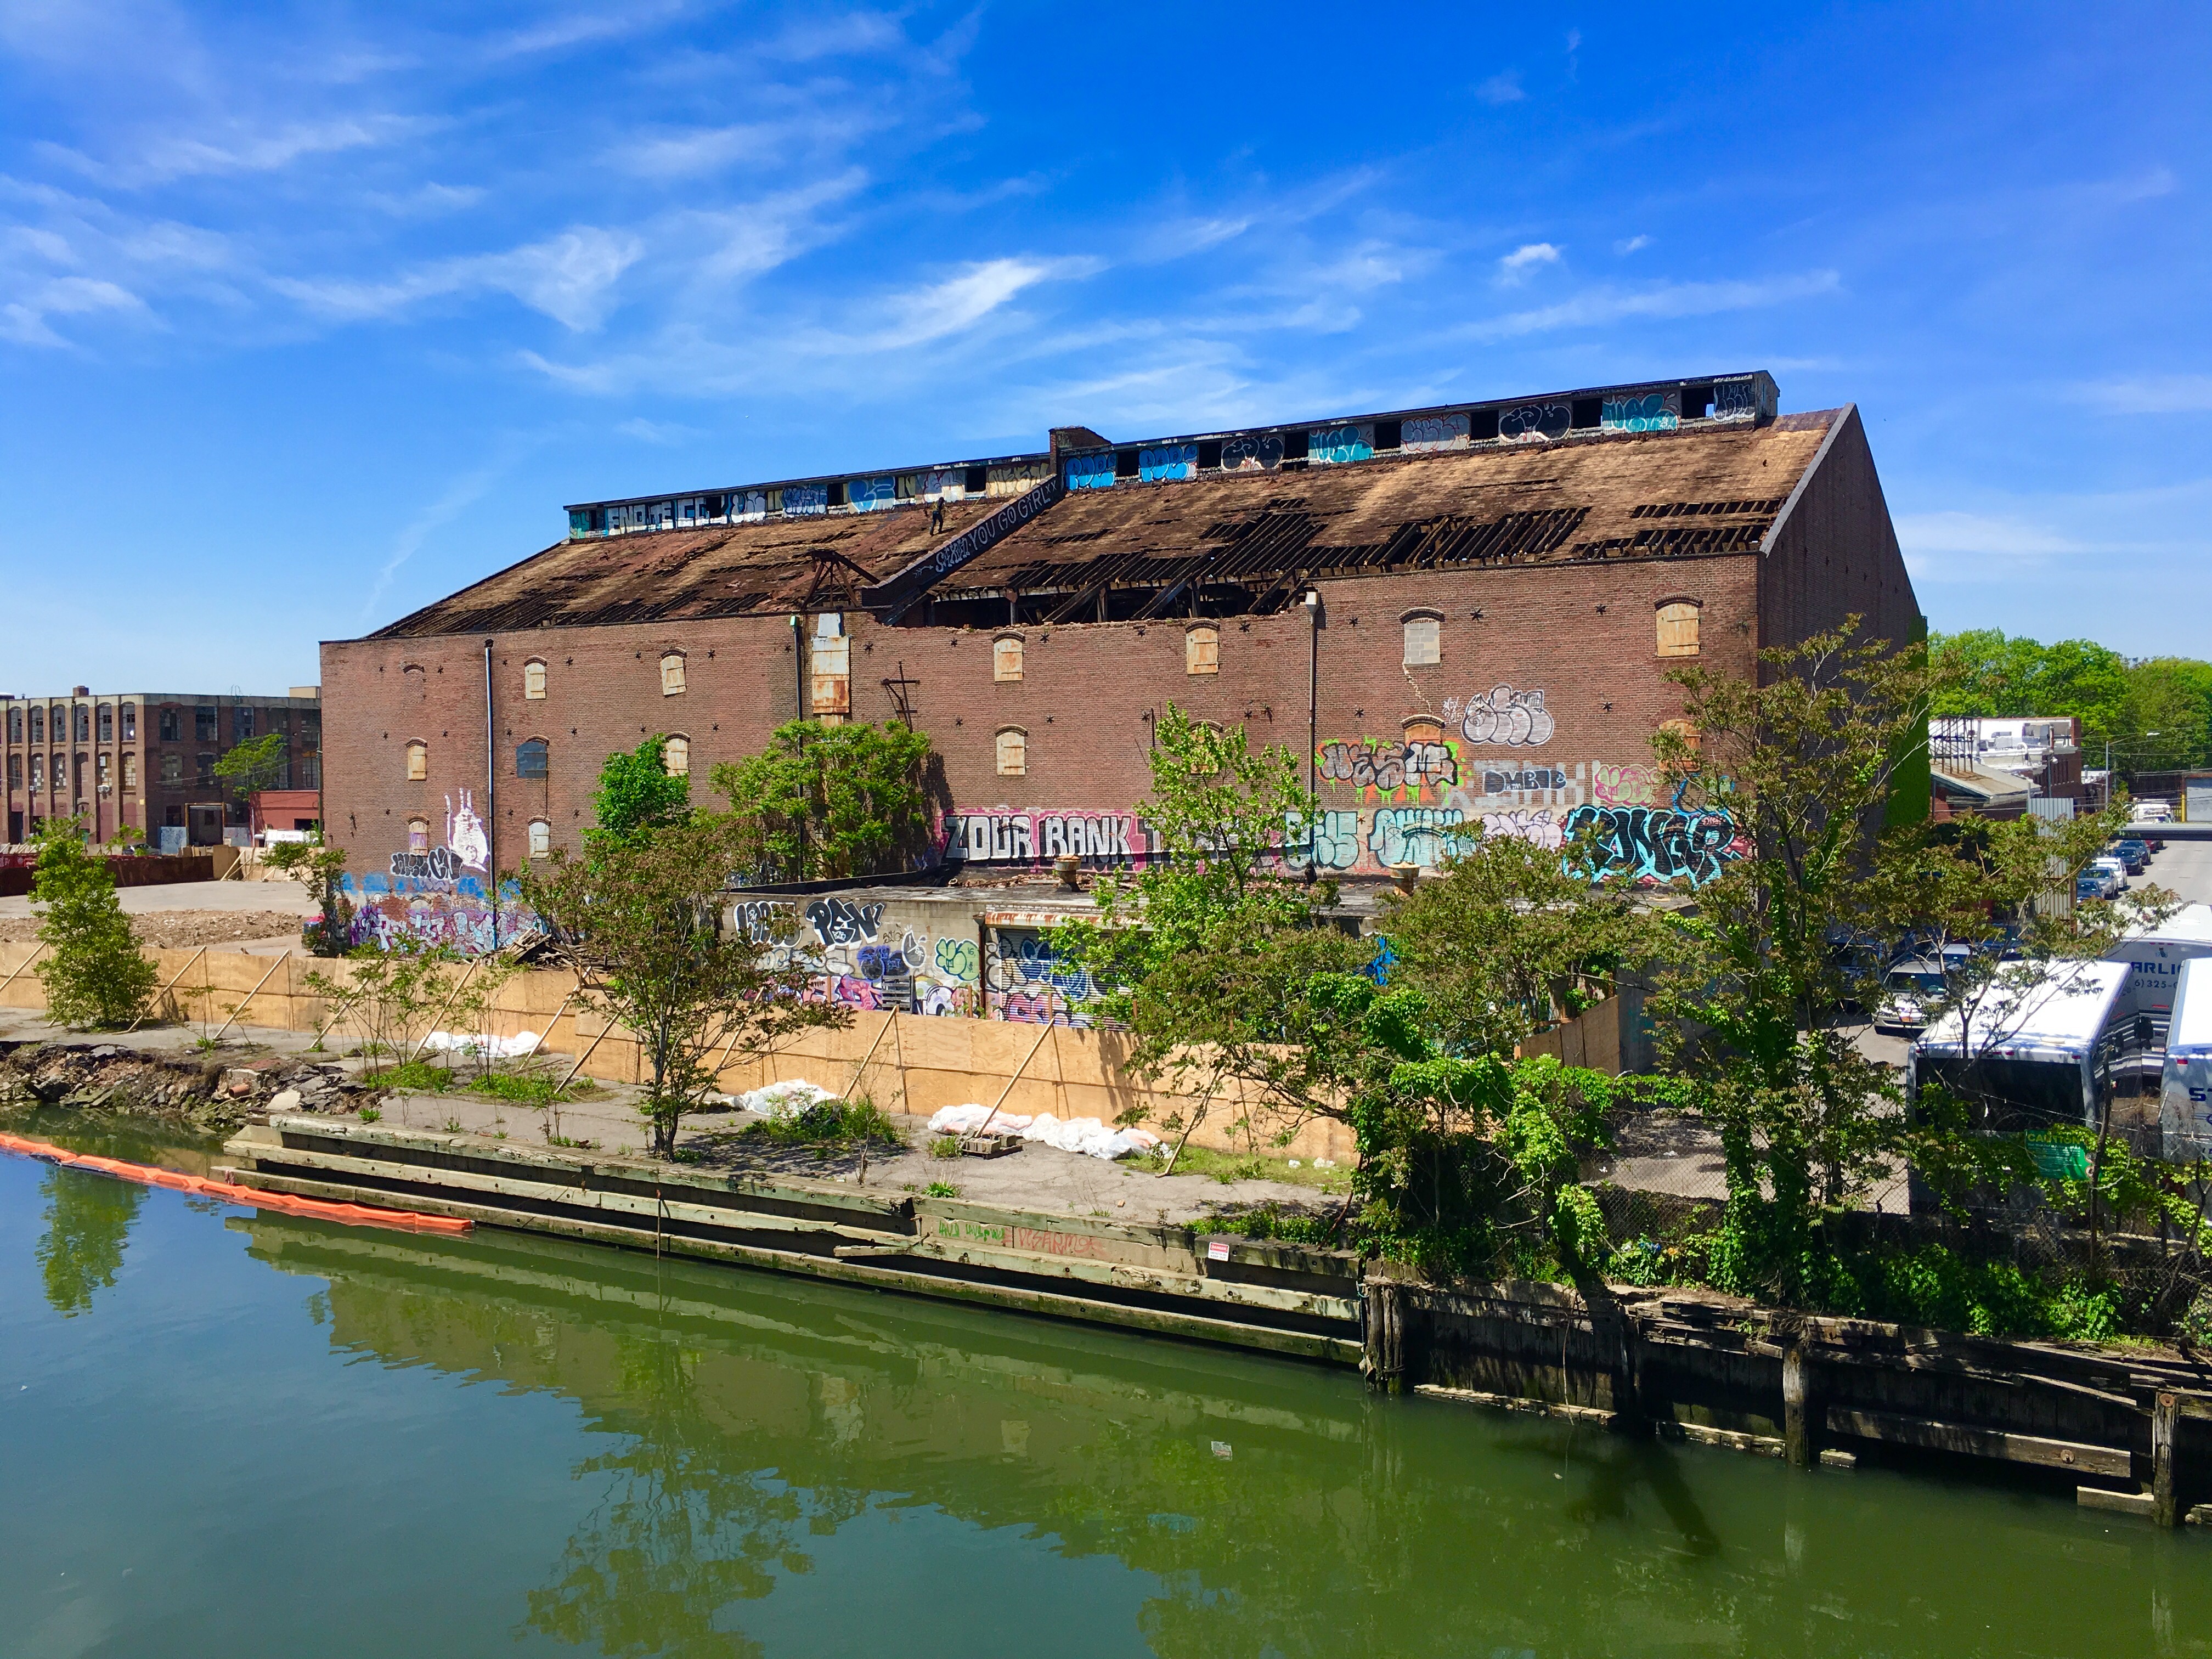 This is what the S.W. Bowne Grain Storehouse looked like in May 2018, before a fire damaged the south side of the property. Eagle file photo by Lore Croghan 